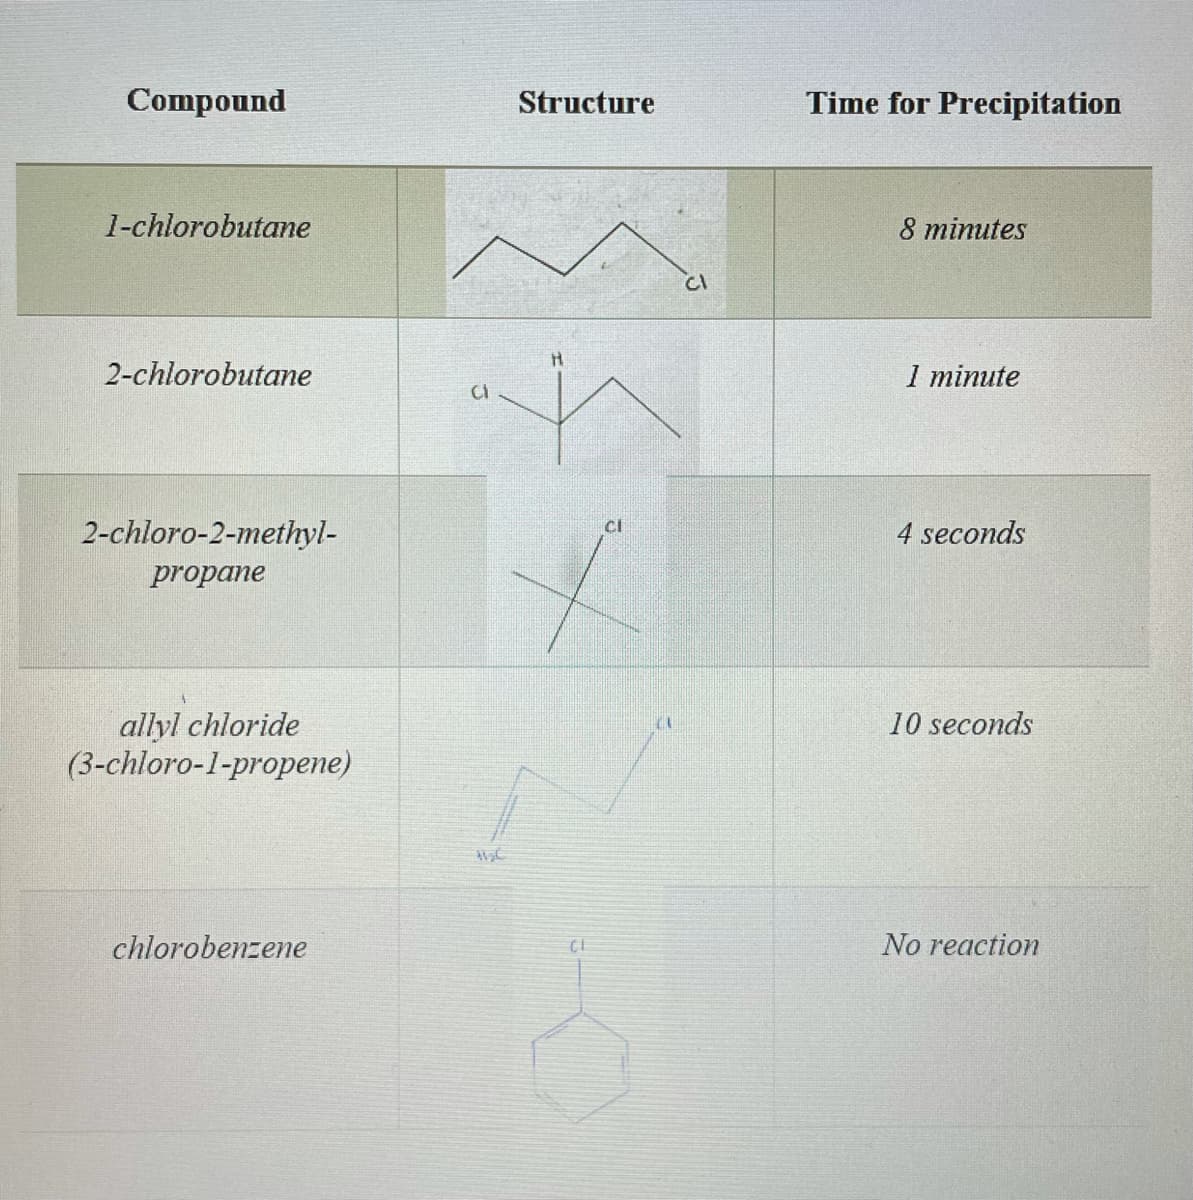 Сompound
Structure
Time for Precipitation
1-chlorobutane
8 minutes
2-chlorobutane
1 minute
CI
ci
2-chloro-2-methyl-
4 seconds
propane
allyl chloride
(3-chloro-1-propene)
10 seconds
chlorobenzene
No reaction
